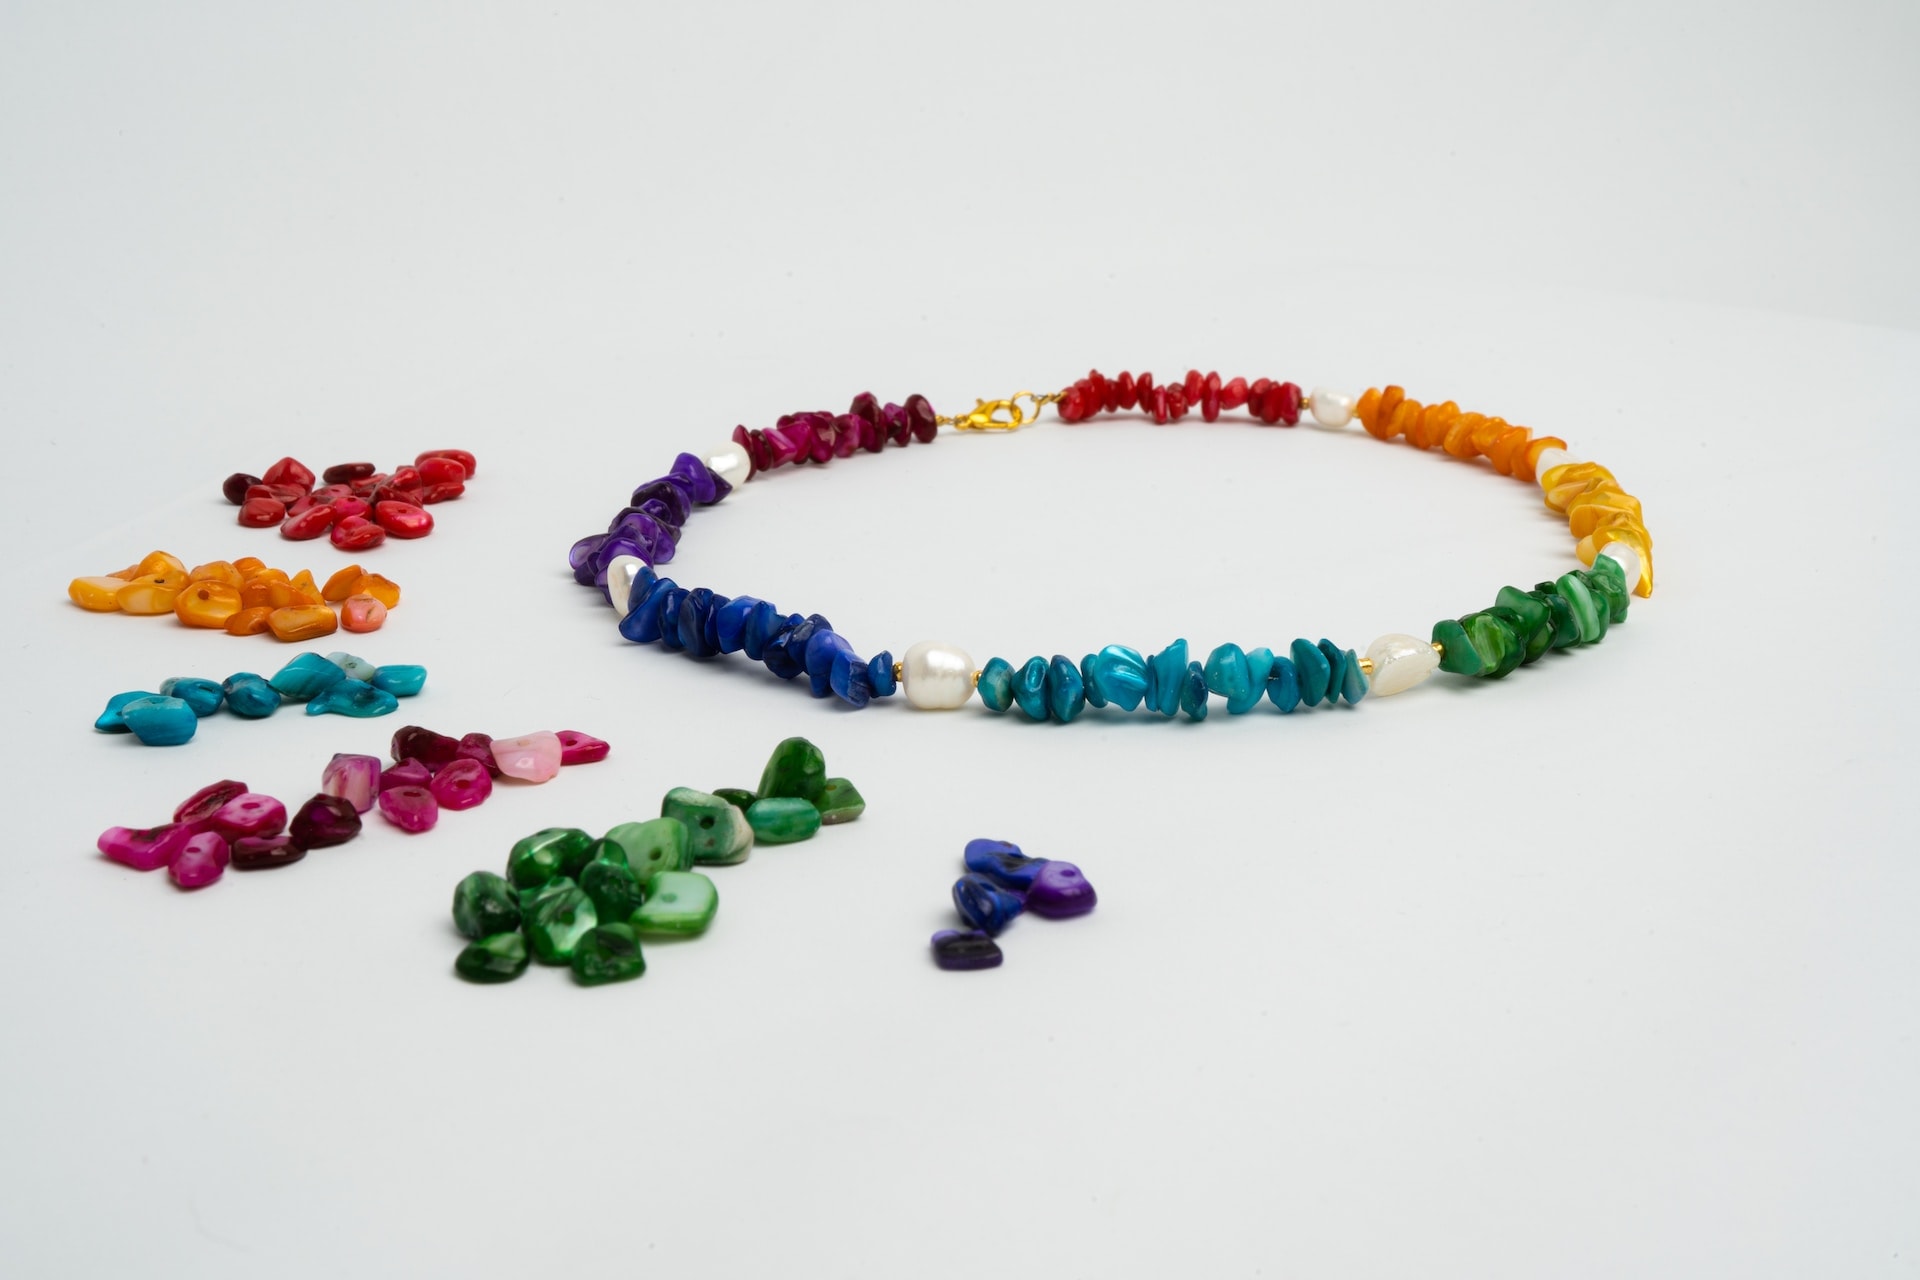 The Artistry of Beads: Exploring the Most Beautiful Bead Patterns for Jewelry Making